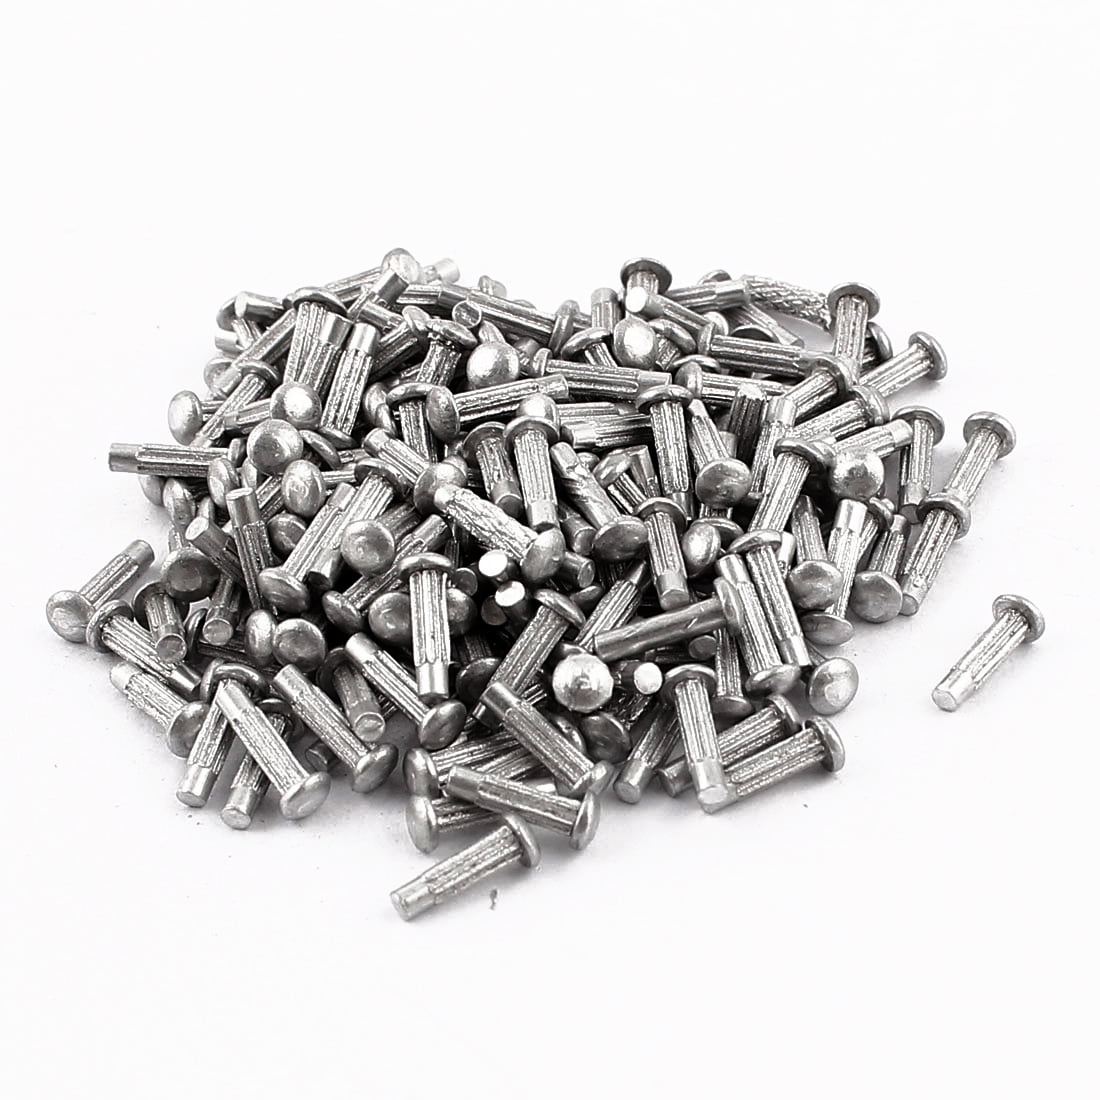 Plain Finish Pack of 1LB - Approximately 8 Pieces 5/8 Diameter X 1/2 Length Solid Rivet Steel Round Head